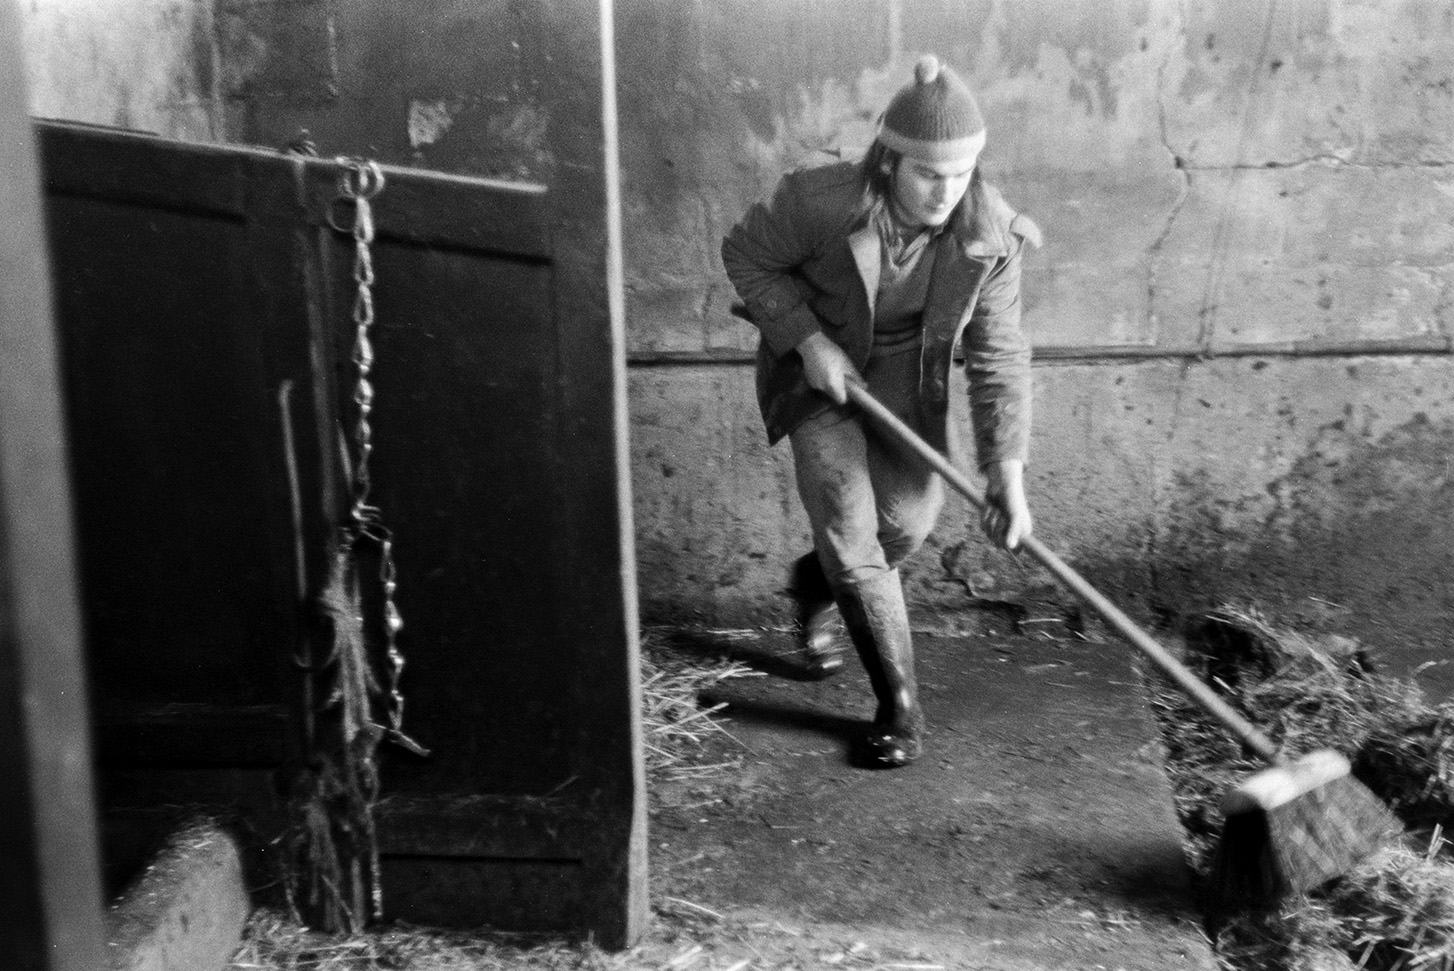 Derek Bright mucking out a cow shed, using a brush, at Mill Road Farm, Beaford. The farm was also known as Jeffrys.